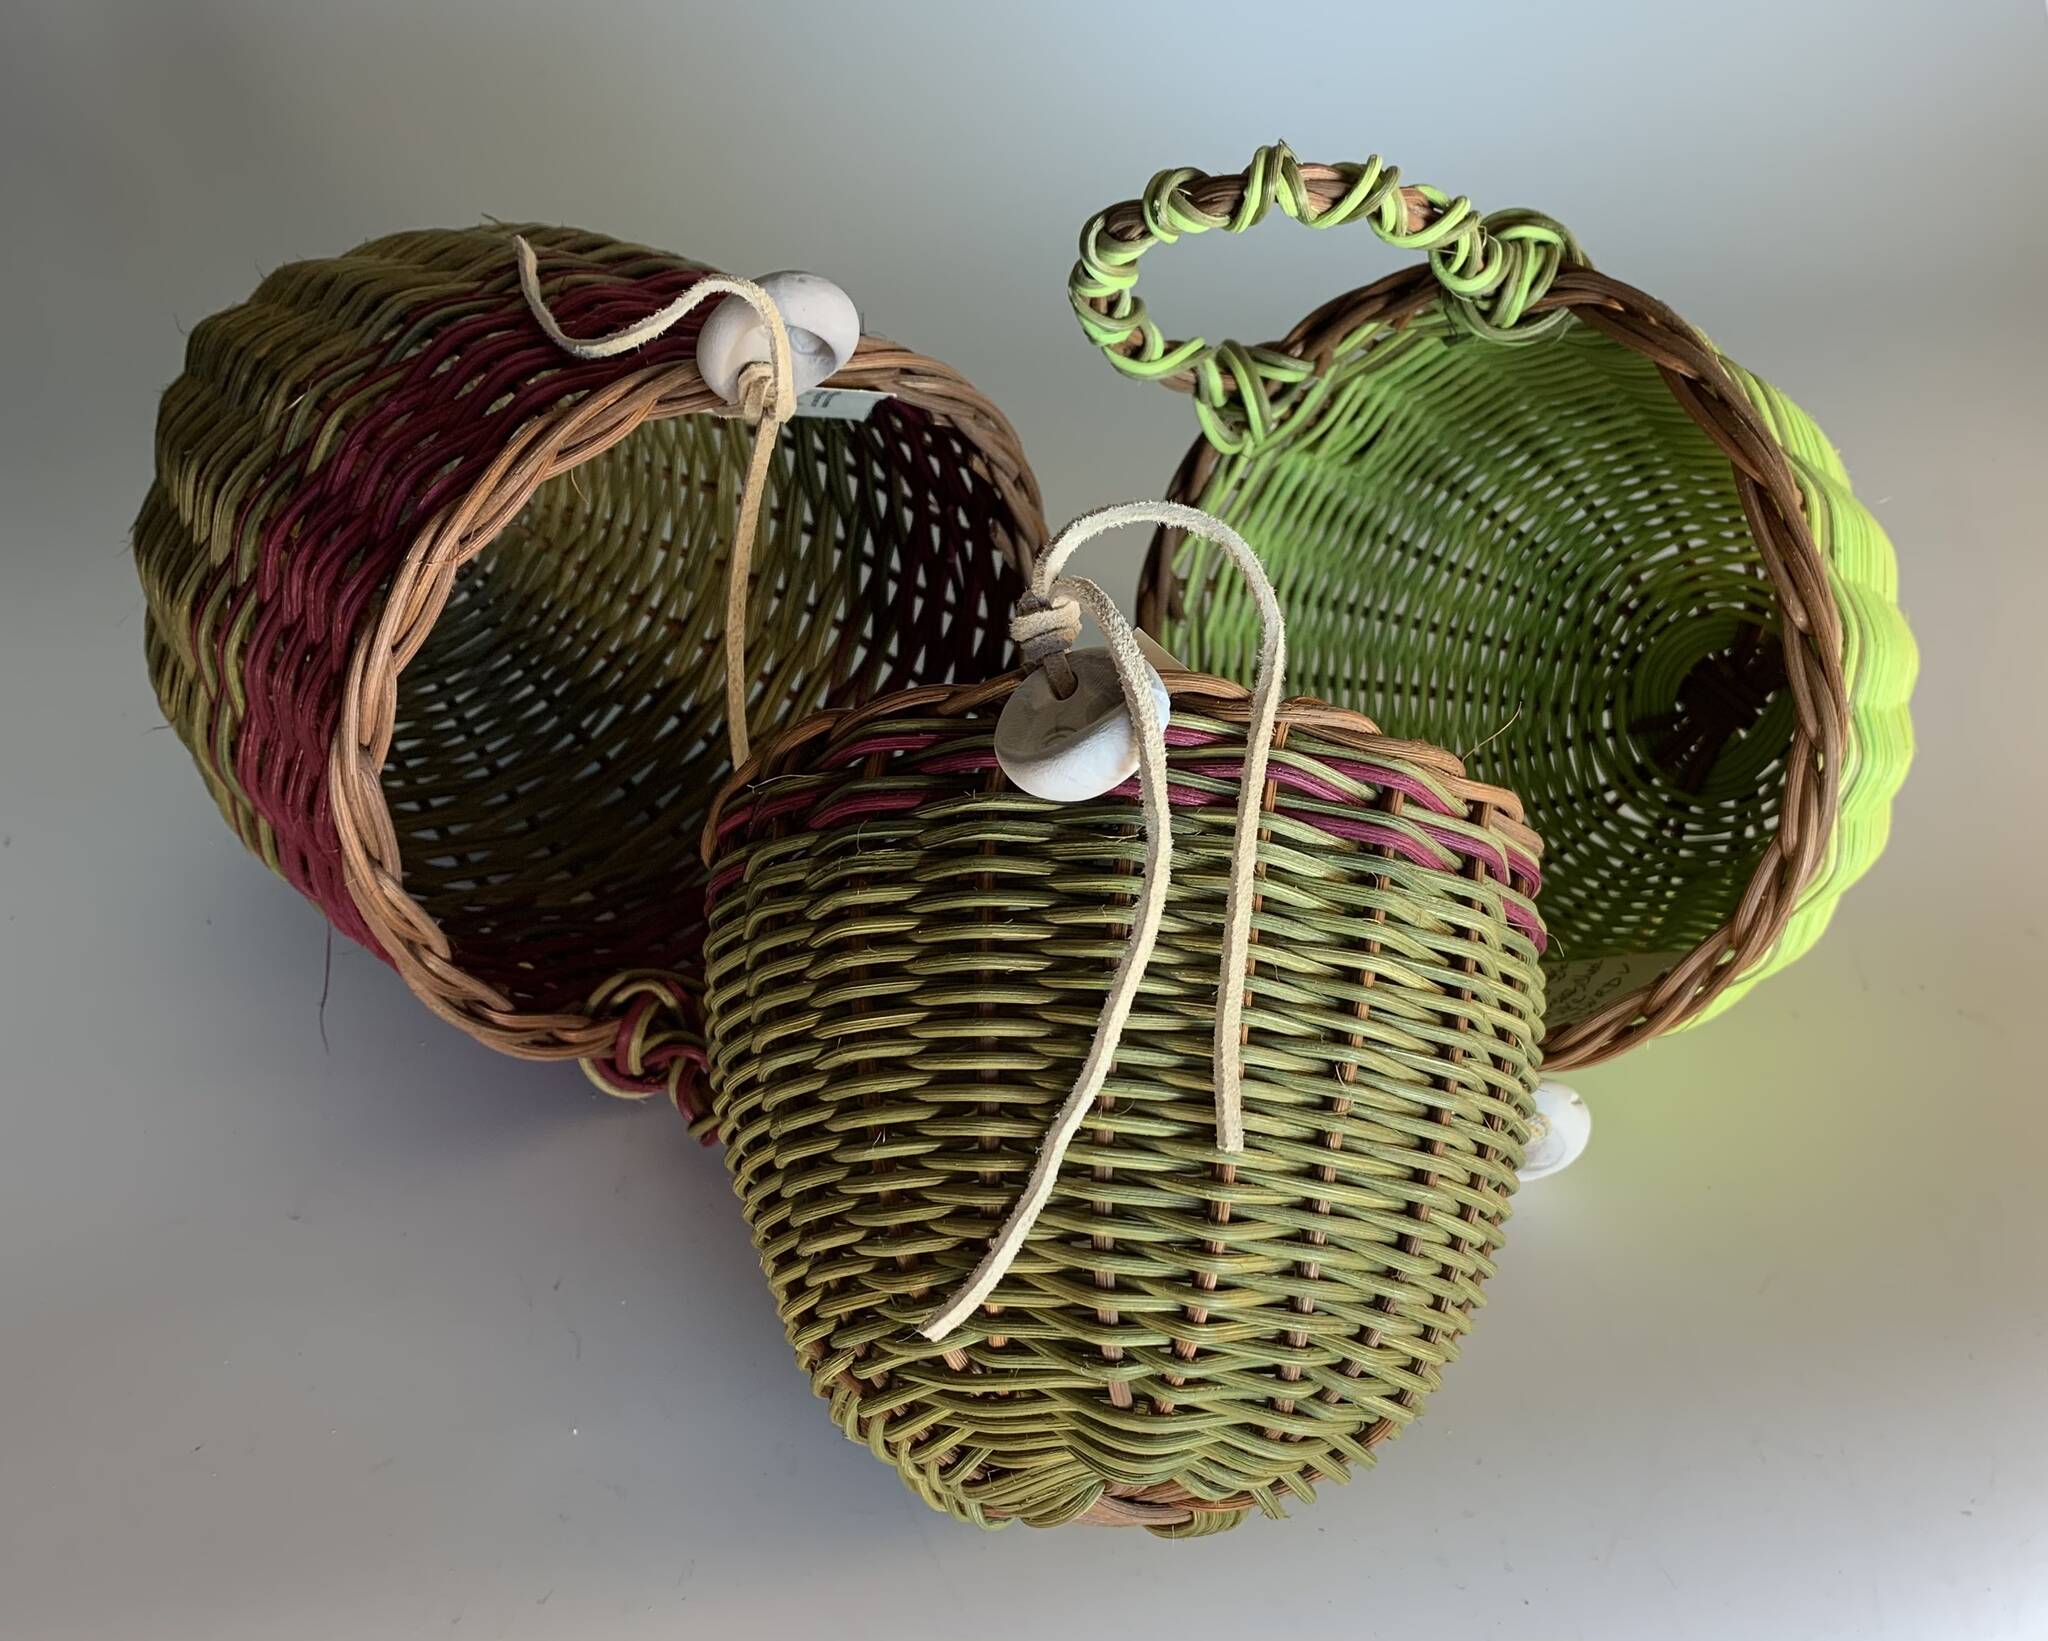 Basket weaver Reggie Kastler is known for her colorful baskets in all shapes and sizes. (Photo provided)